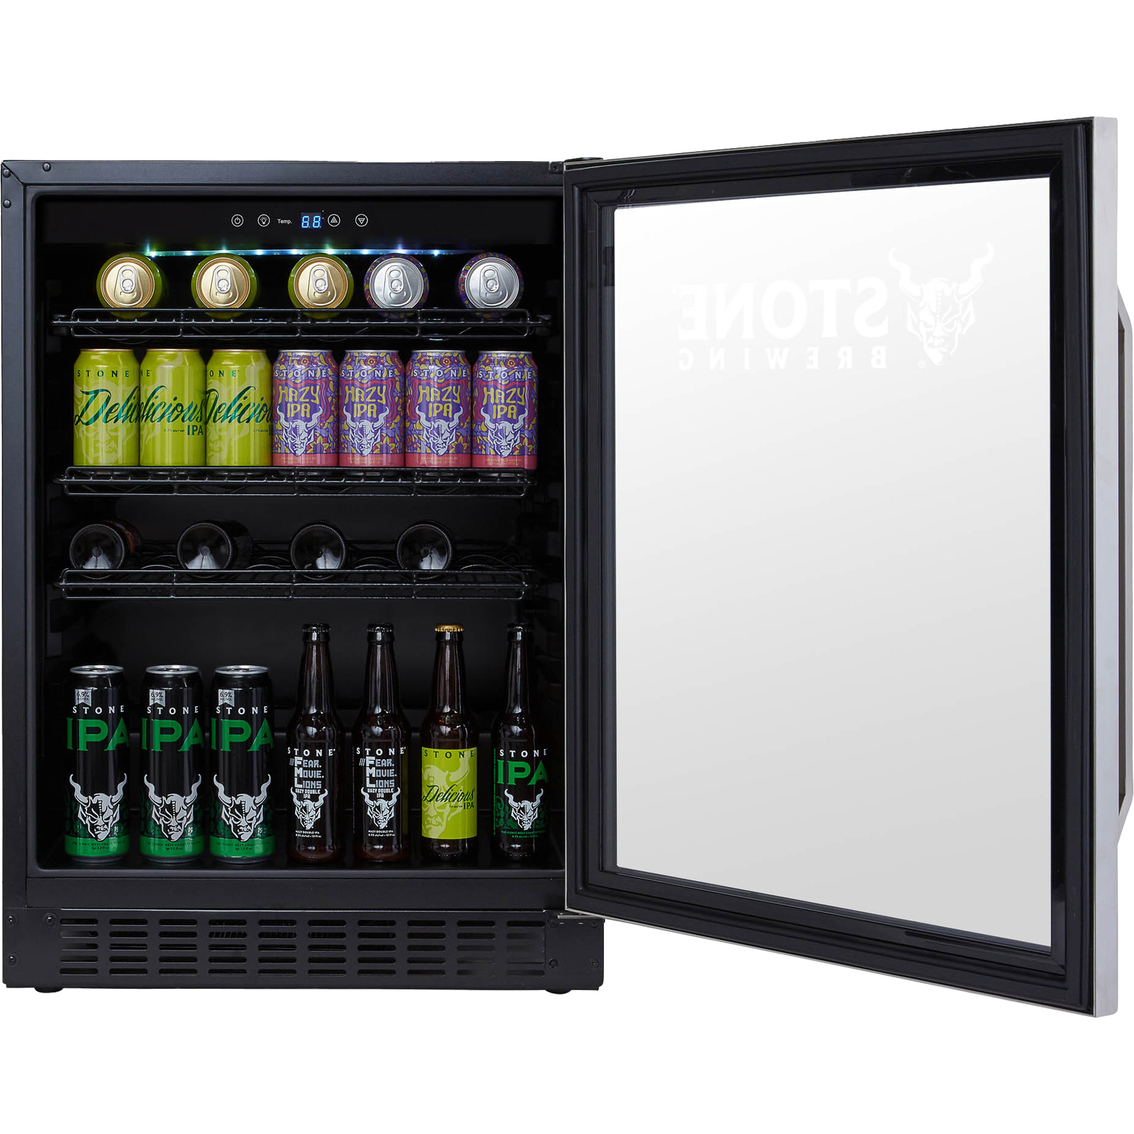 New Air LLC Stone Brewing 180 Can FlipShelf Beer and Beverage Refrigerator - Image 5 of 10